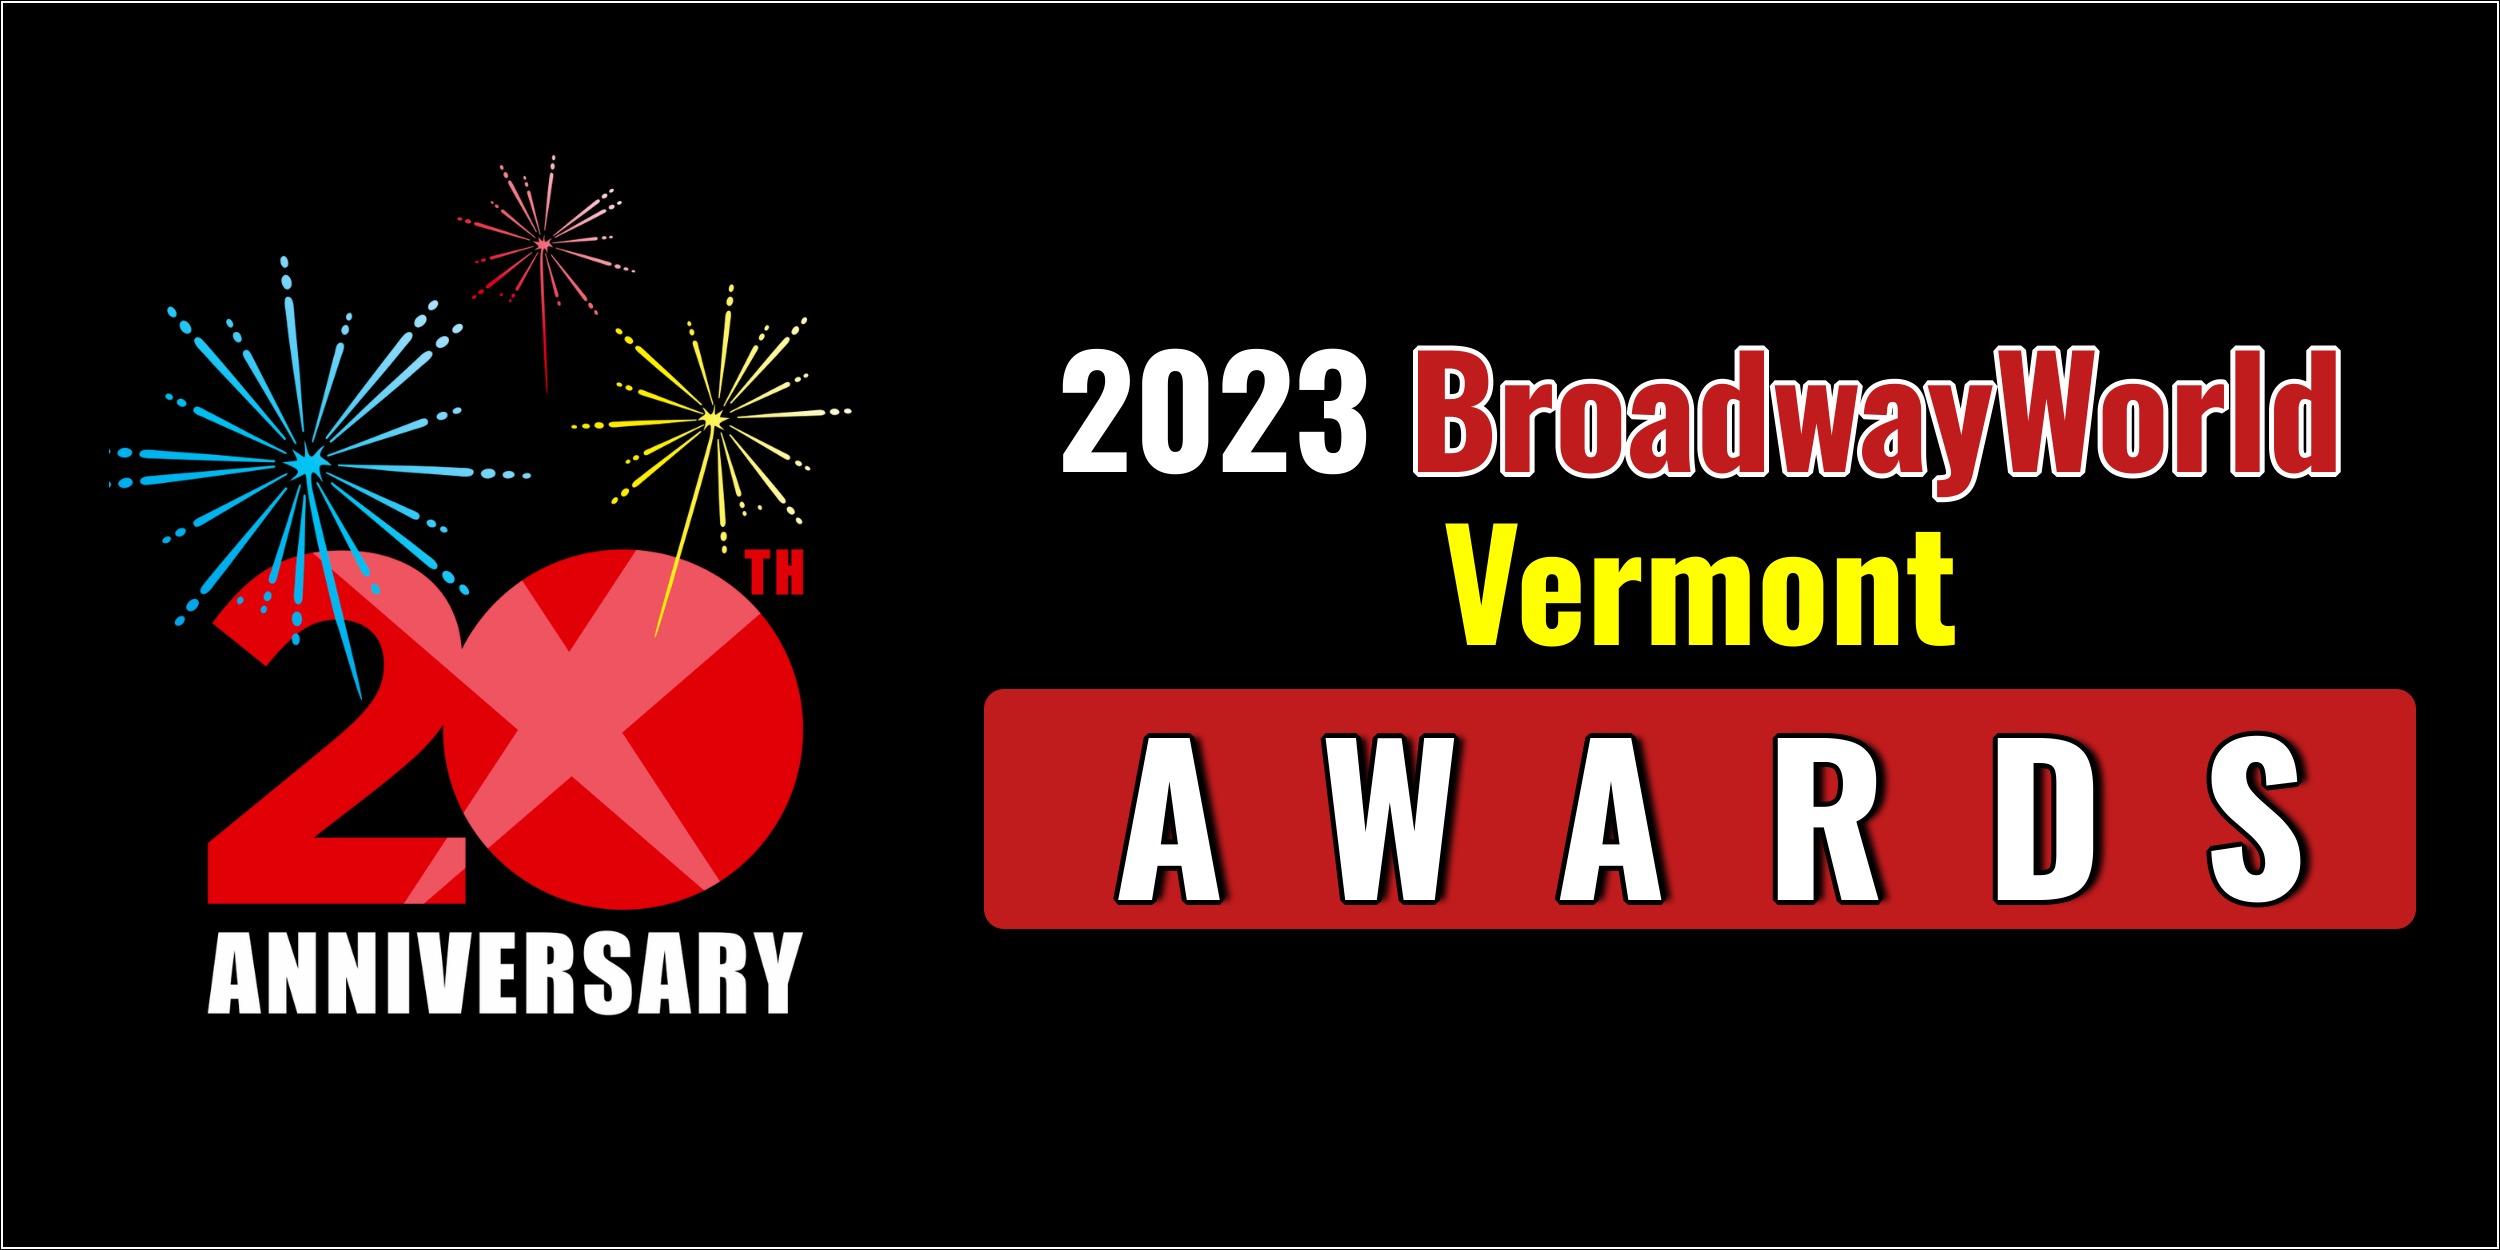 Latest Standings Announced For The 2023 BroadwayWorld Vermont Awards; BEASTS OF CRETE Leads Best Play!